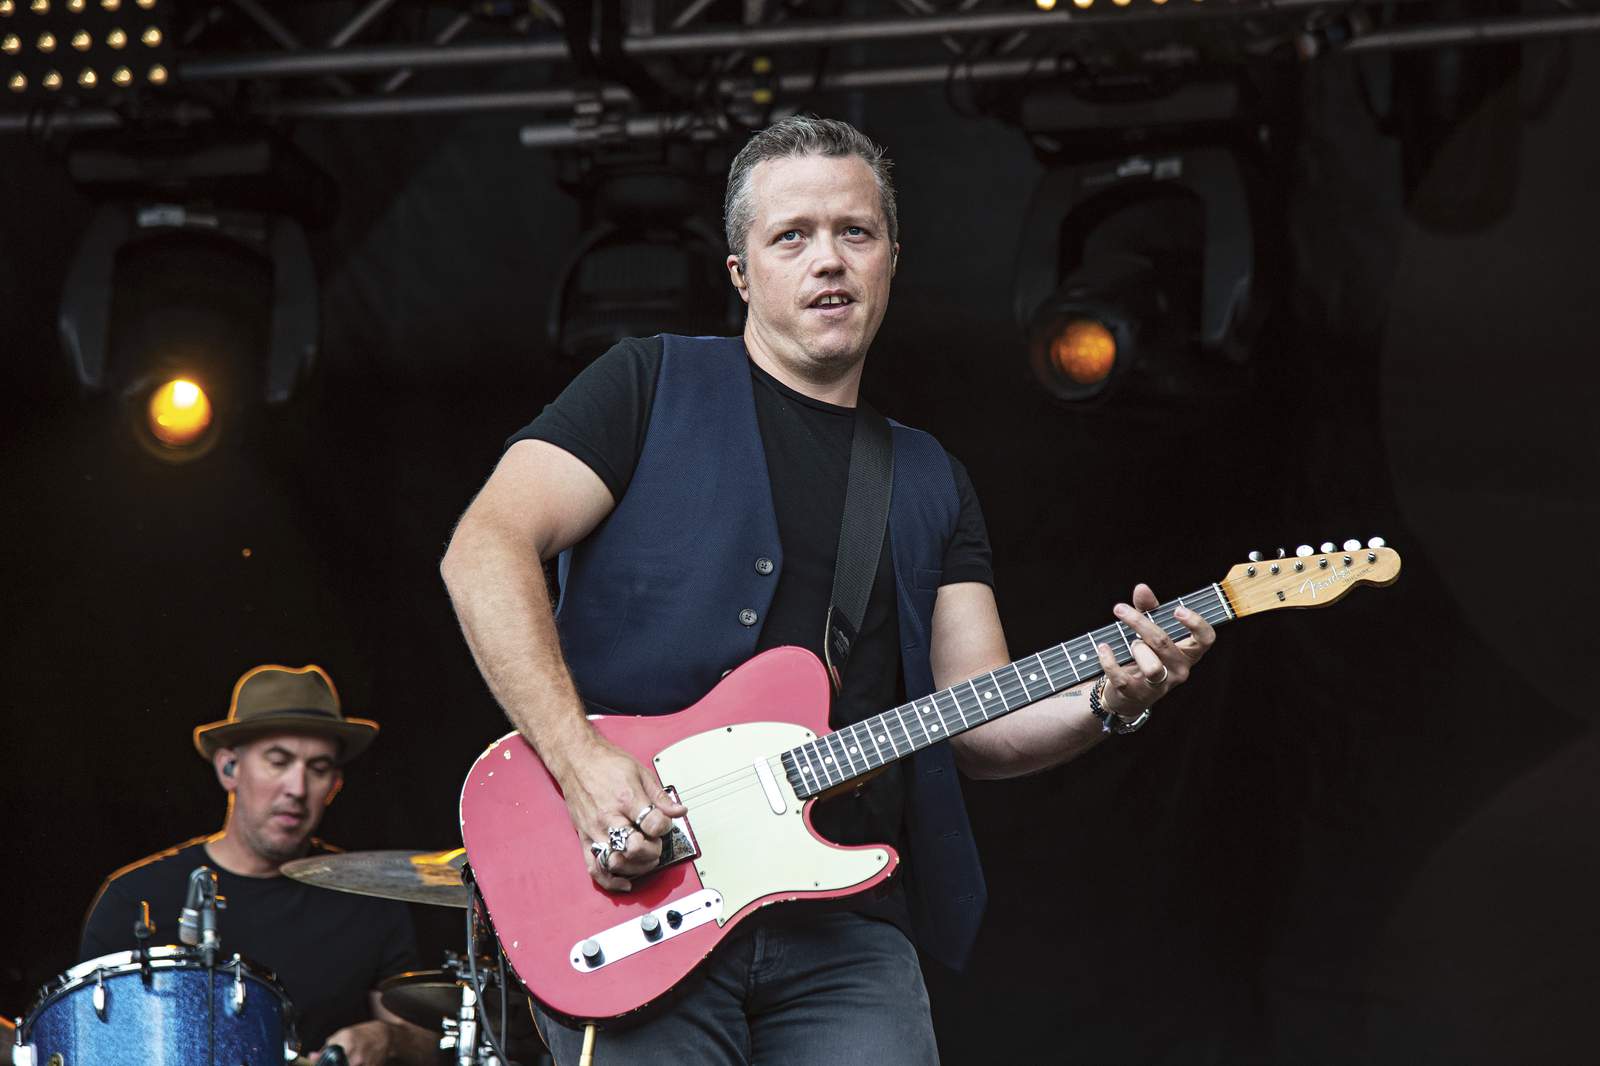 Summertime, and the living is uneasy for Jason Isbell